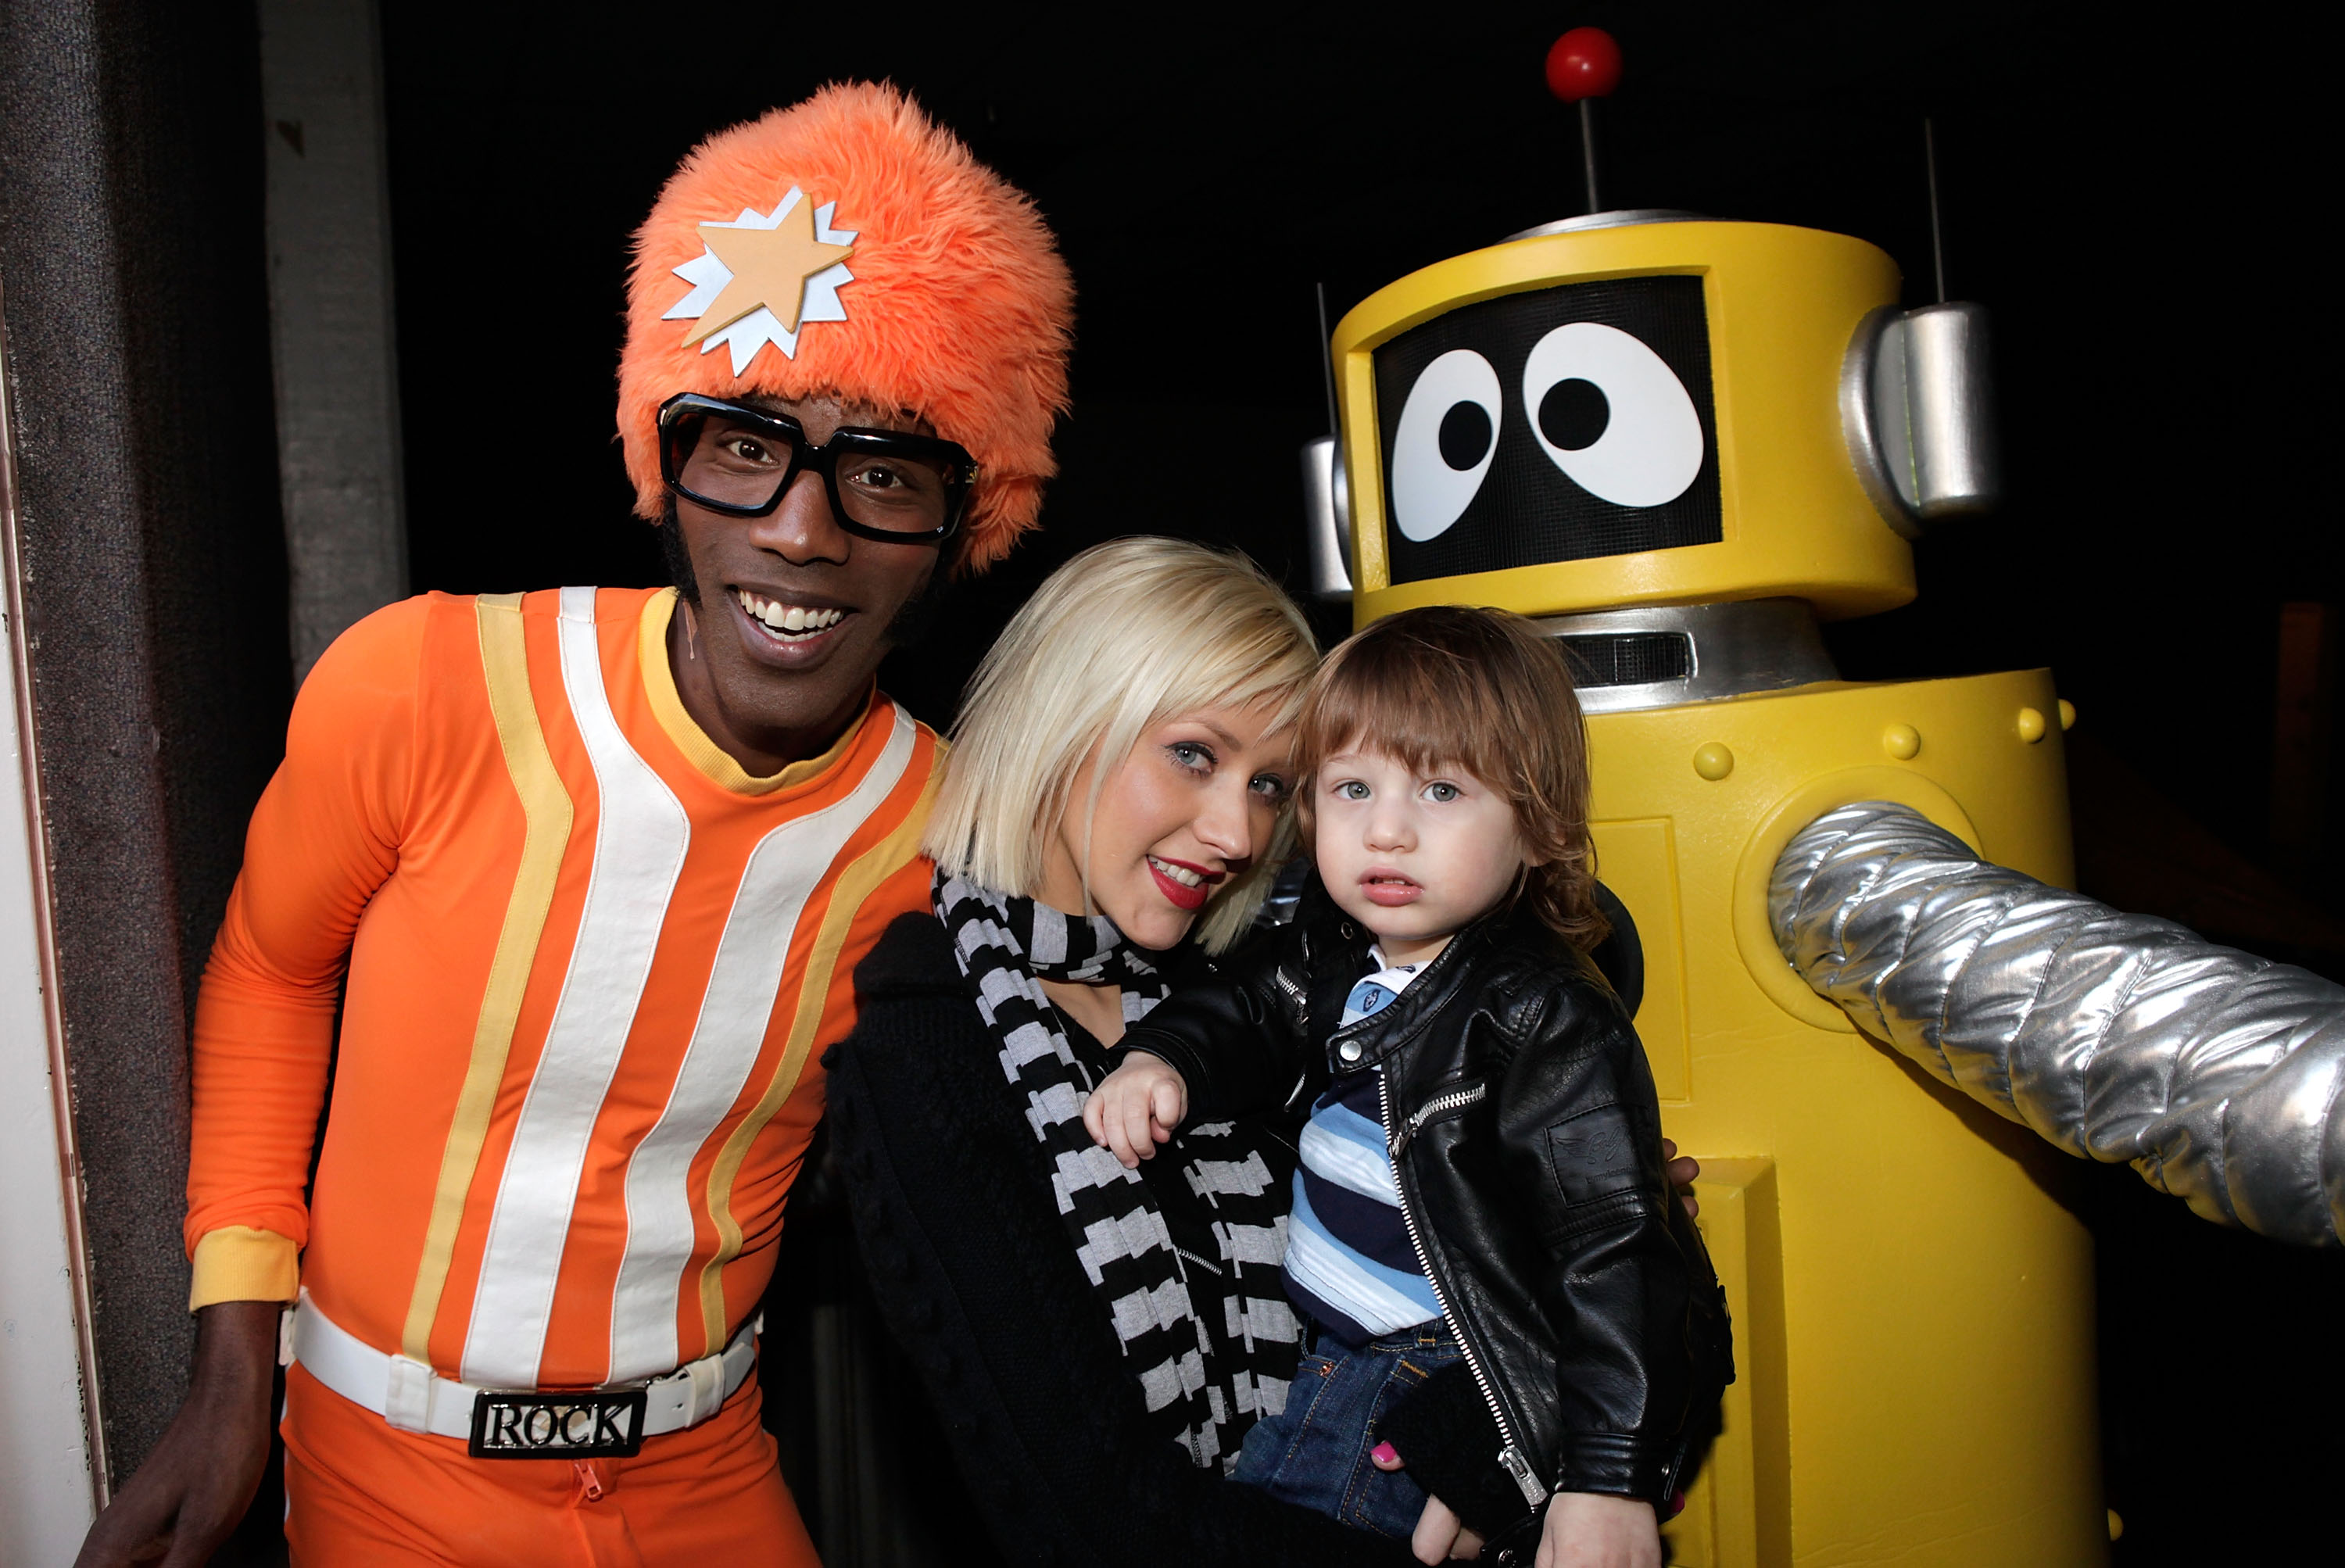 DJ Lance Rock"with Christina Aguilera and her son Max Bratman in California in 2009 | Source: Getty Images